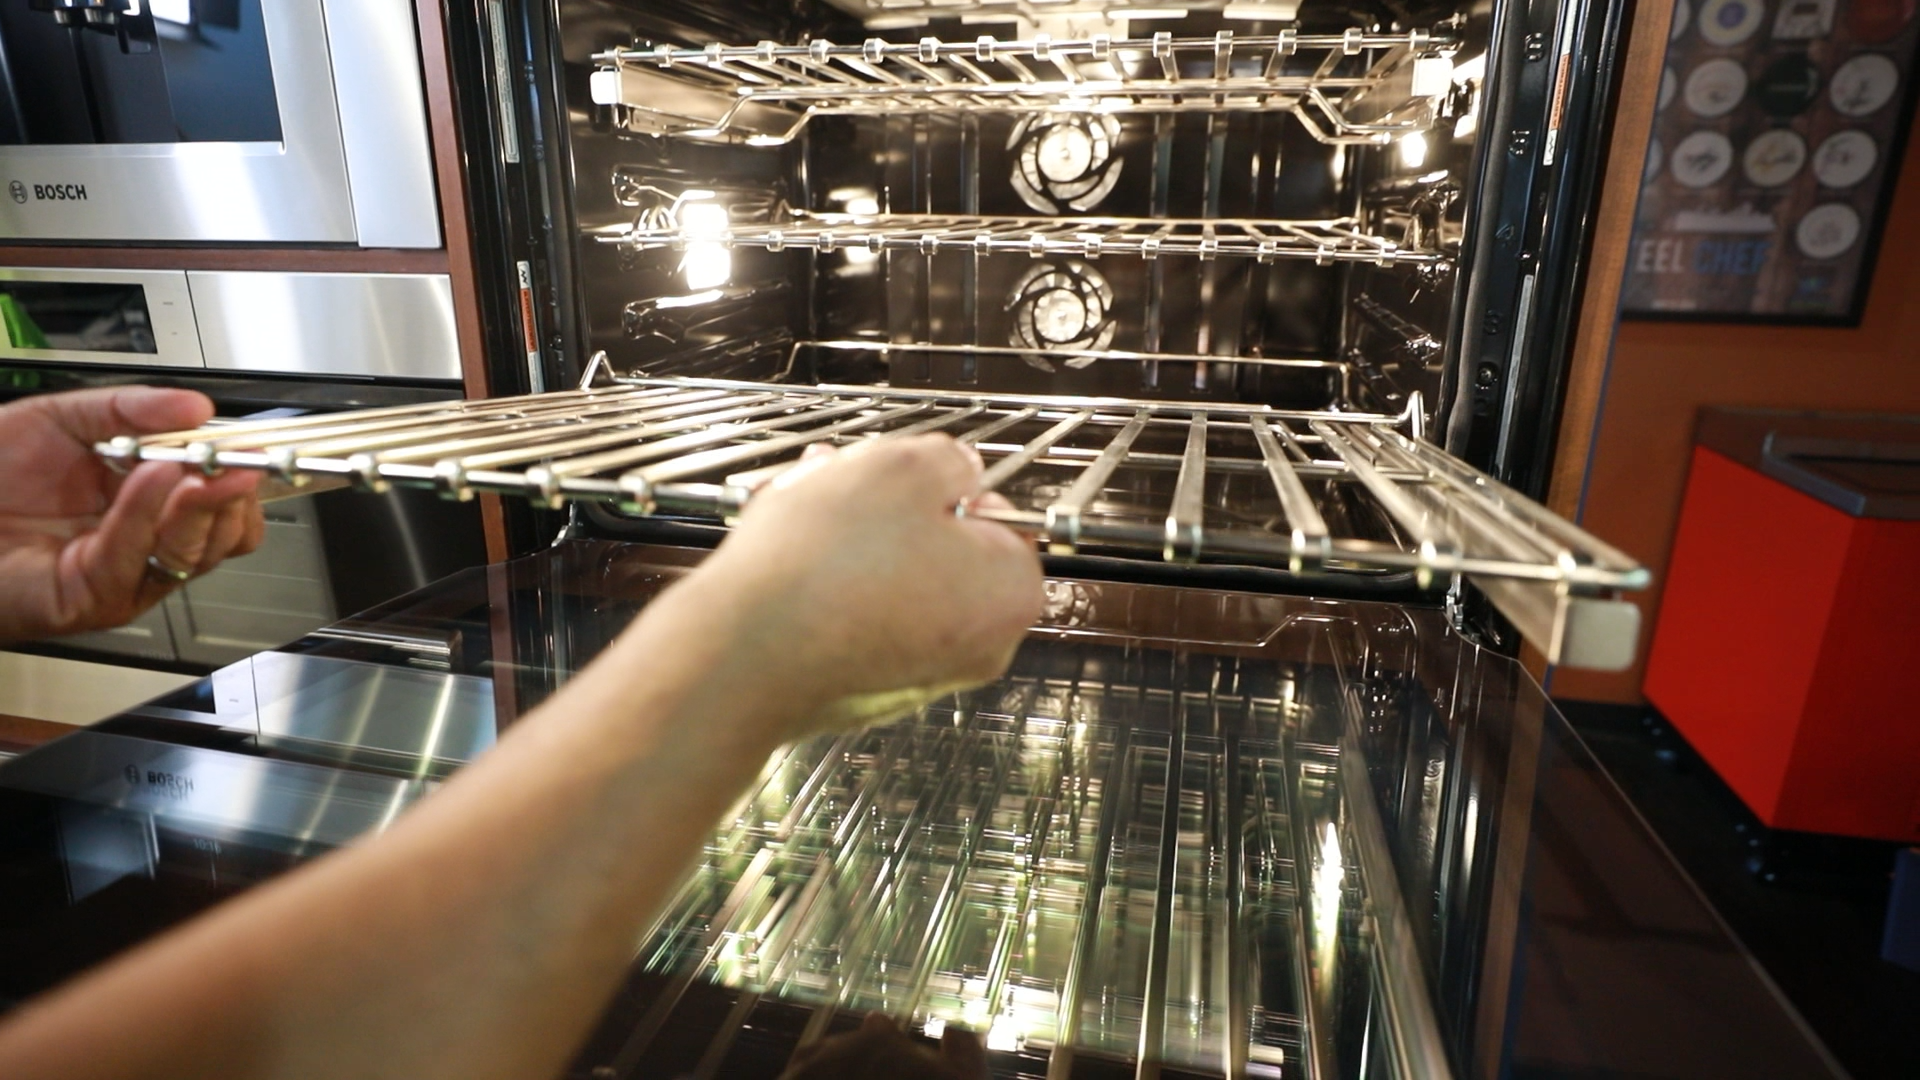 How to Use Oven Racks